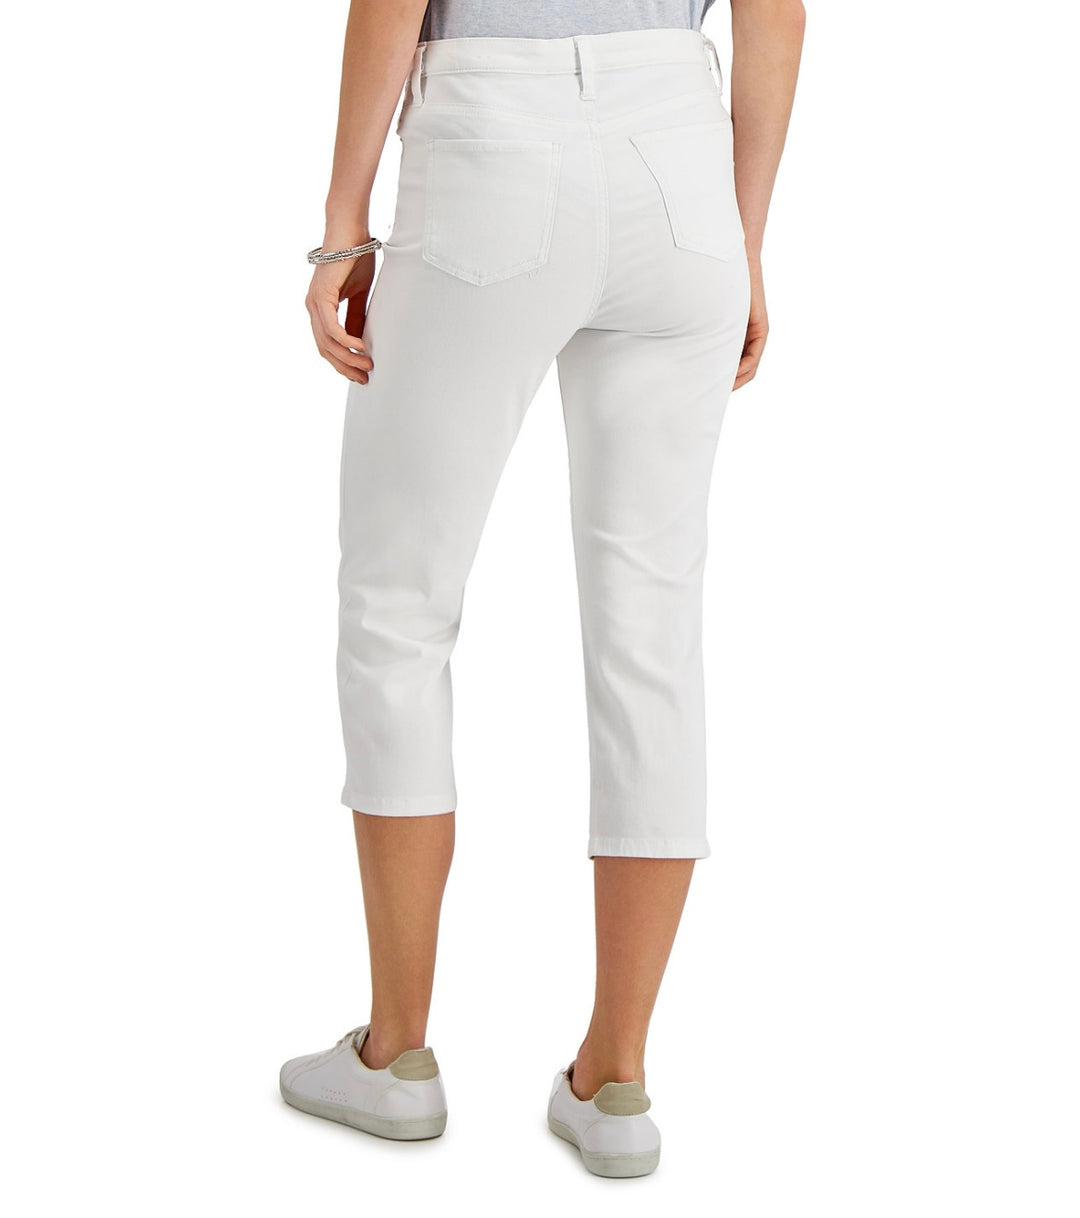 Style & Co. Women's High-Rise Cropped Jeans Bright White Petite Size 8P